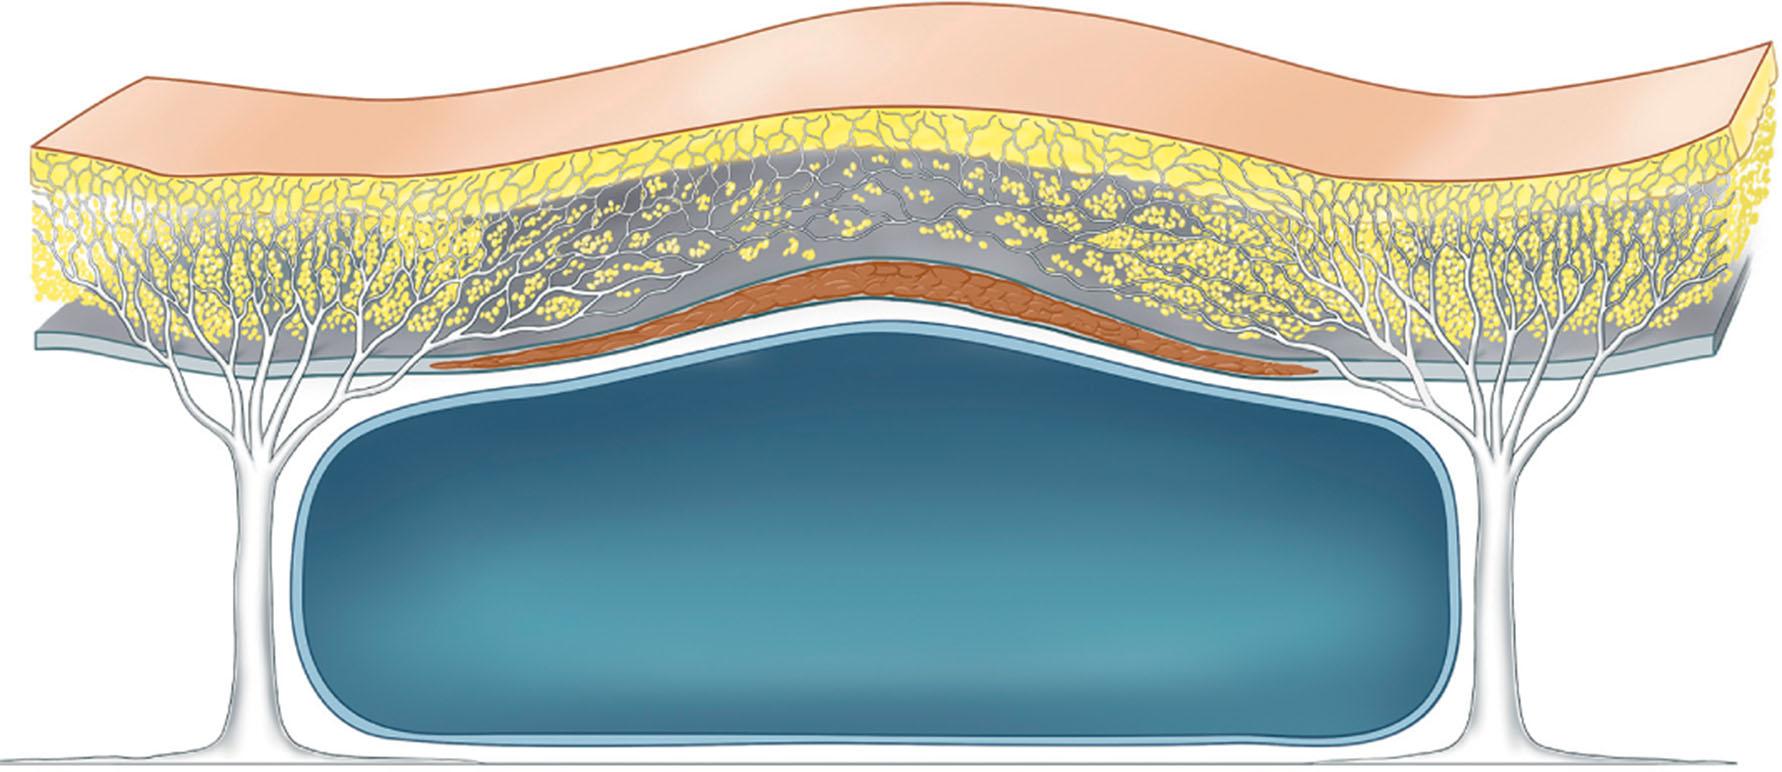 Figure 9.2.5, The effective strength of the retinacular cutis fibers varies in different areas of the face. Overlying the retaining ligaments, the fibers are more vertically orientated, more densely arranged and resist aging changes. Whereas, overlying a space the retinacula fibers are more horizontal and less dense. This structure allows the mobility required for muscle contraction, but the less supported roof over the spaces is prone to laxity with aging.